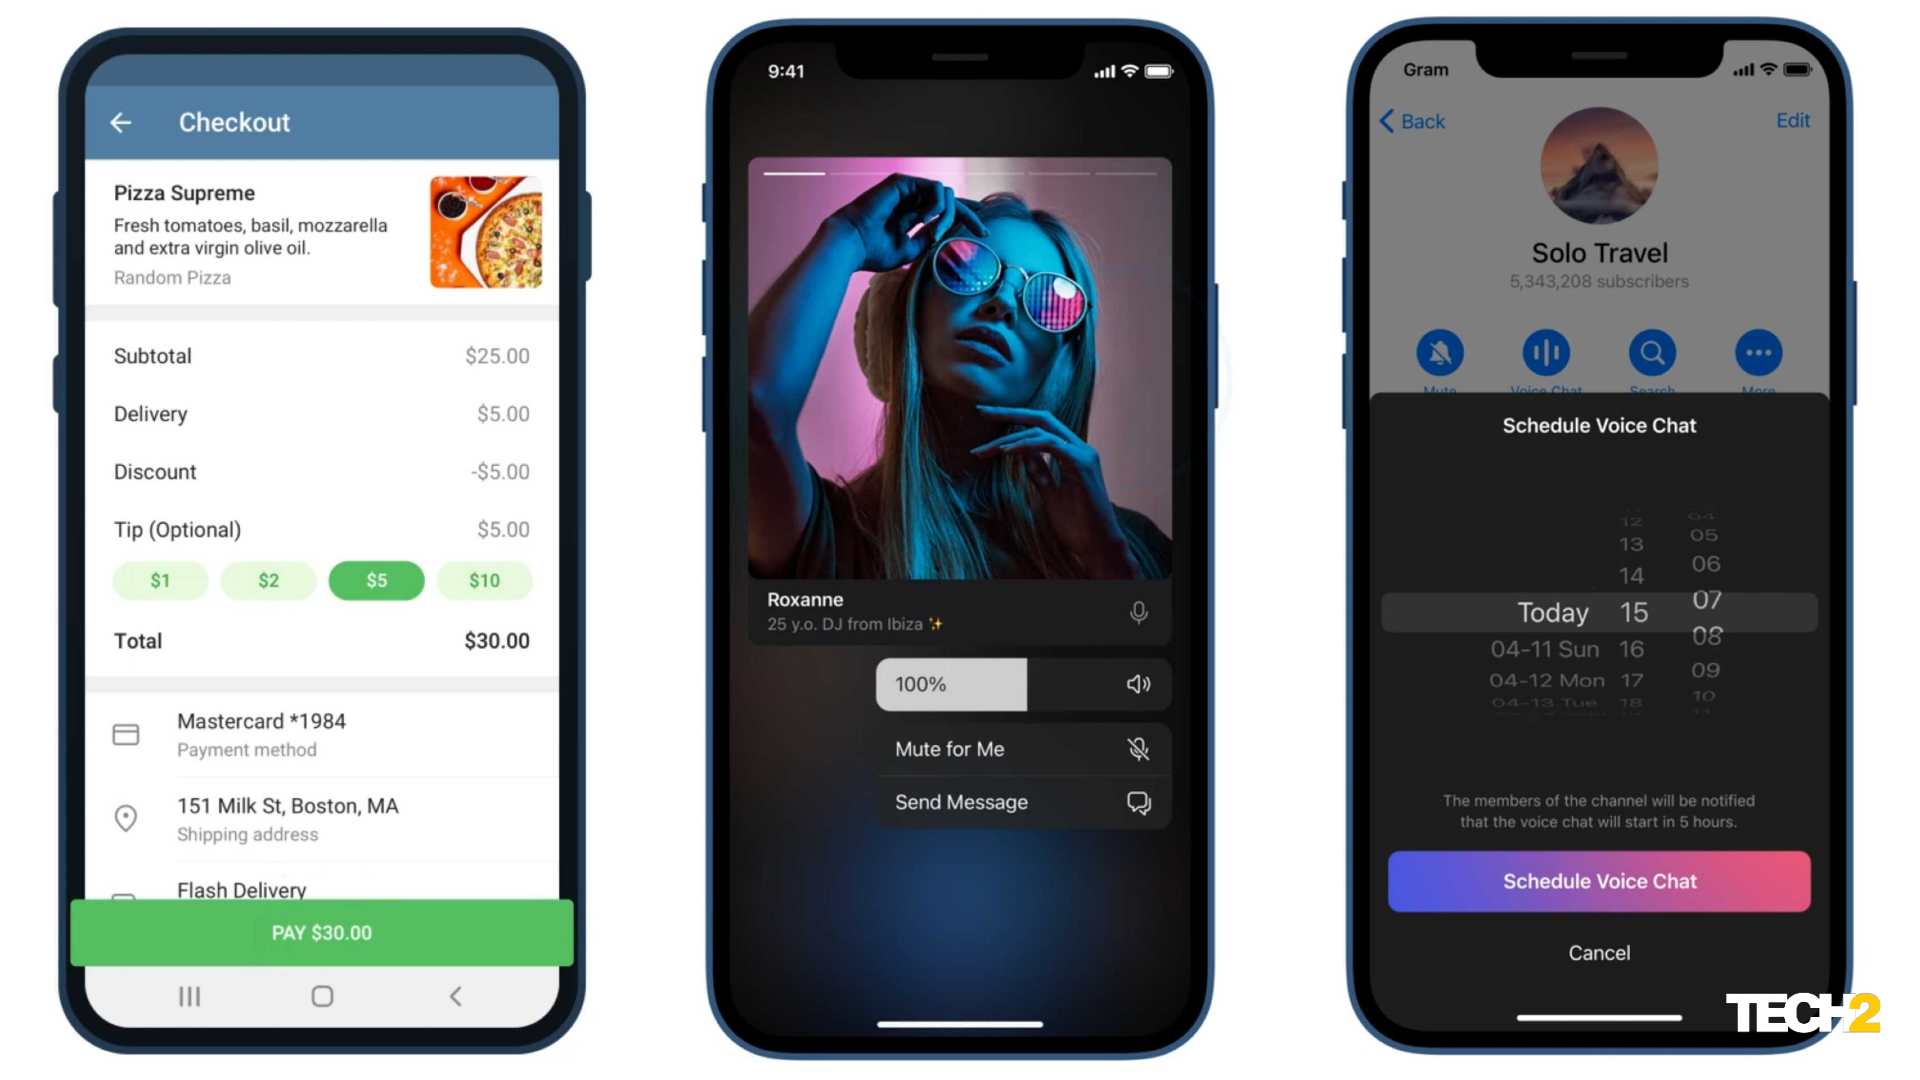 With this update, users can schedule voice chats, make payments and view profiles and bios while in a voice chat. Image: Tech2